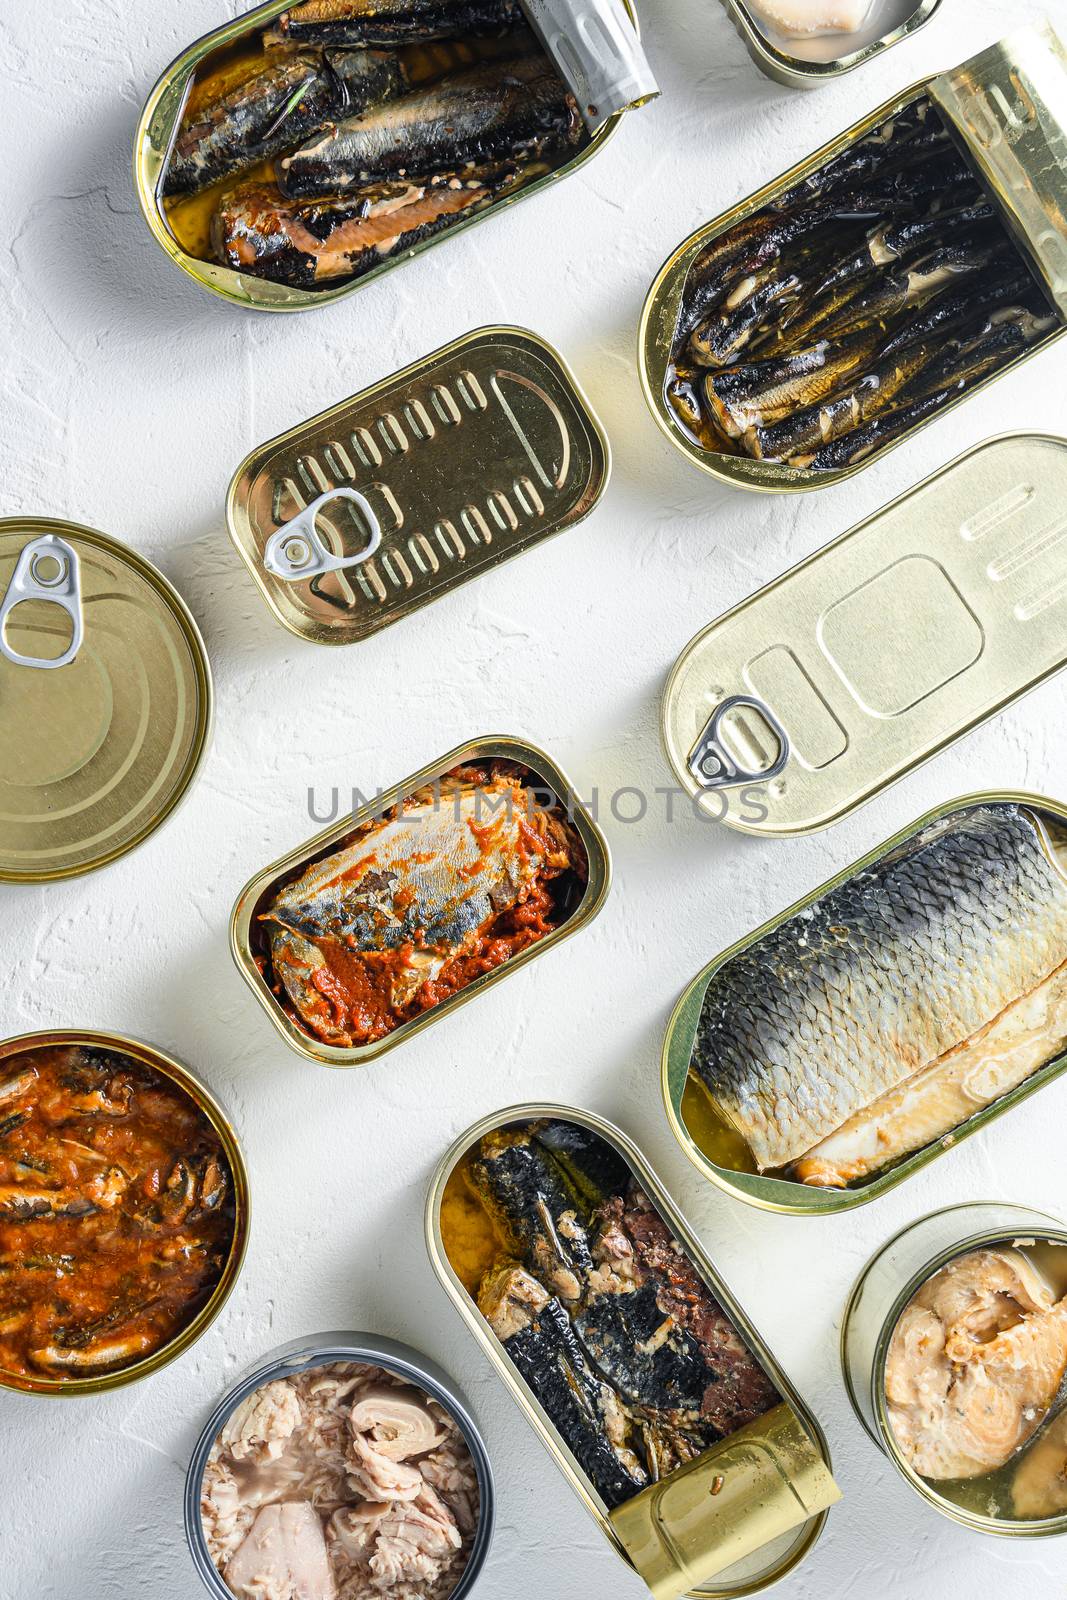 Conserves of canned fish with different types of fish and seafood, opened and closed cans with Saury, mackerel, sprats, sardines, pilchard, squid, tuna, over white stone surface top view.